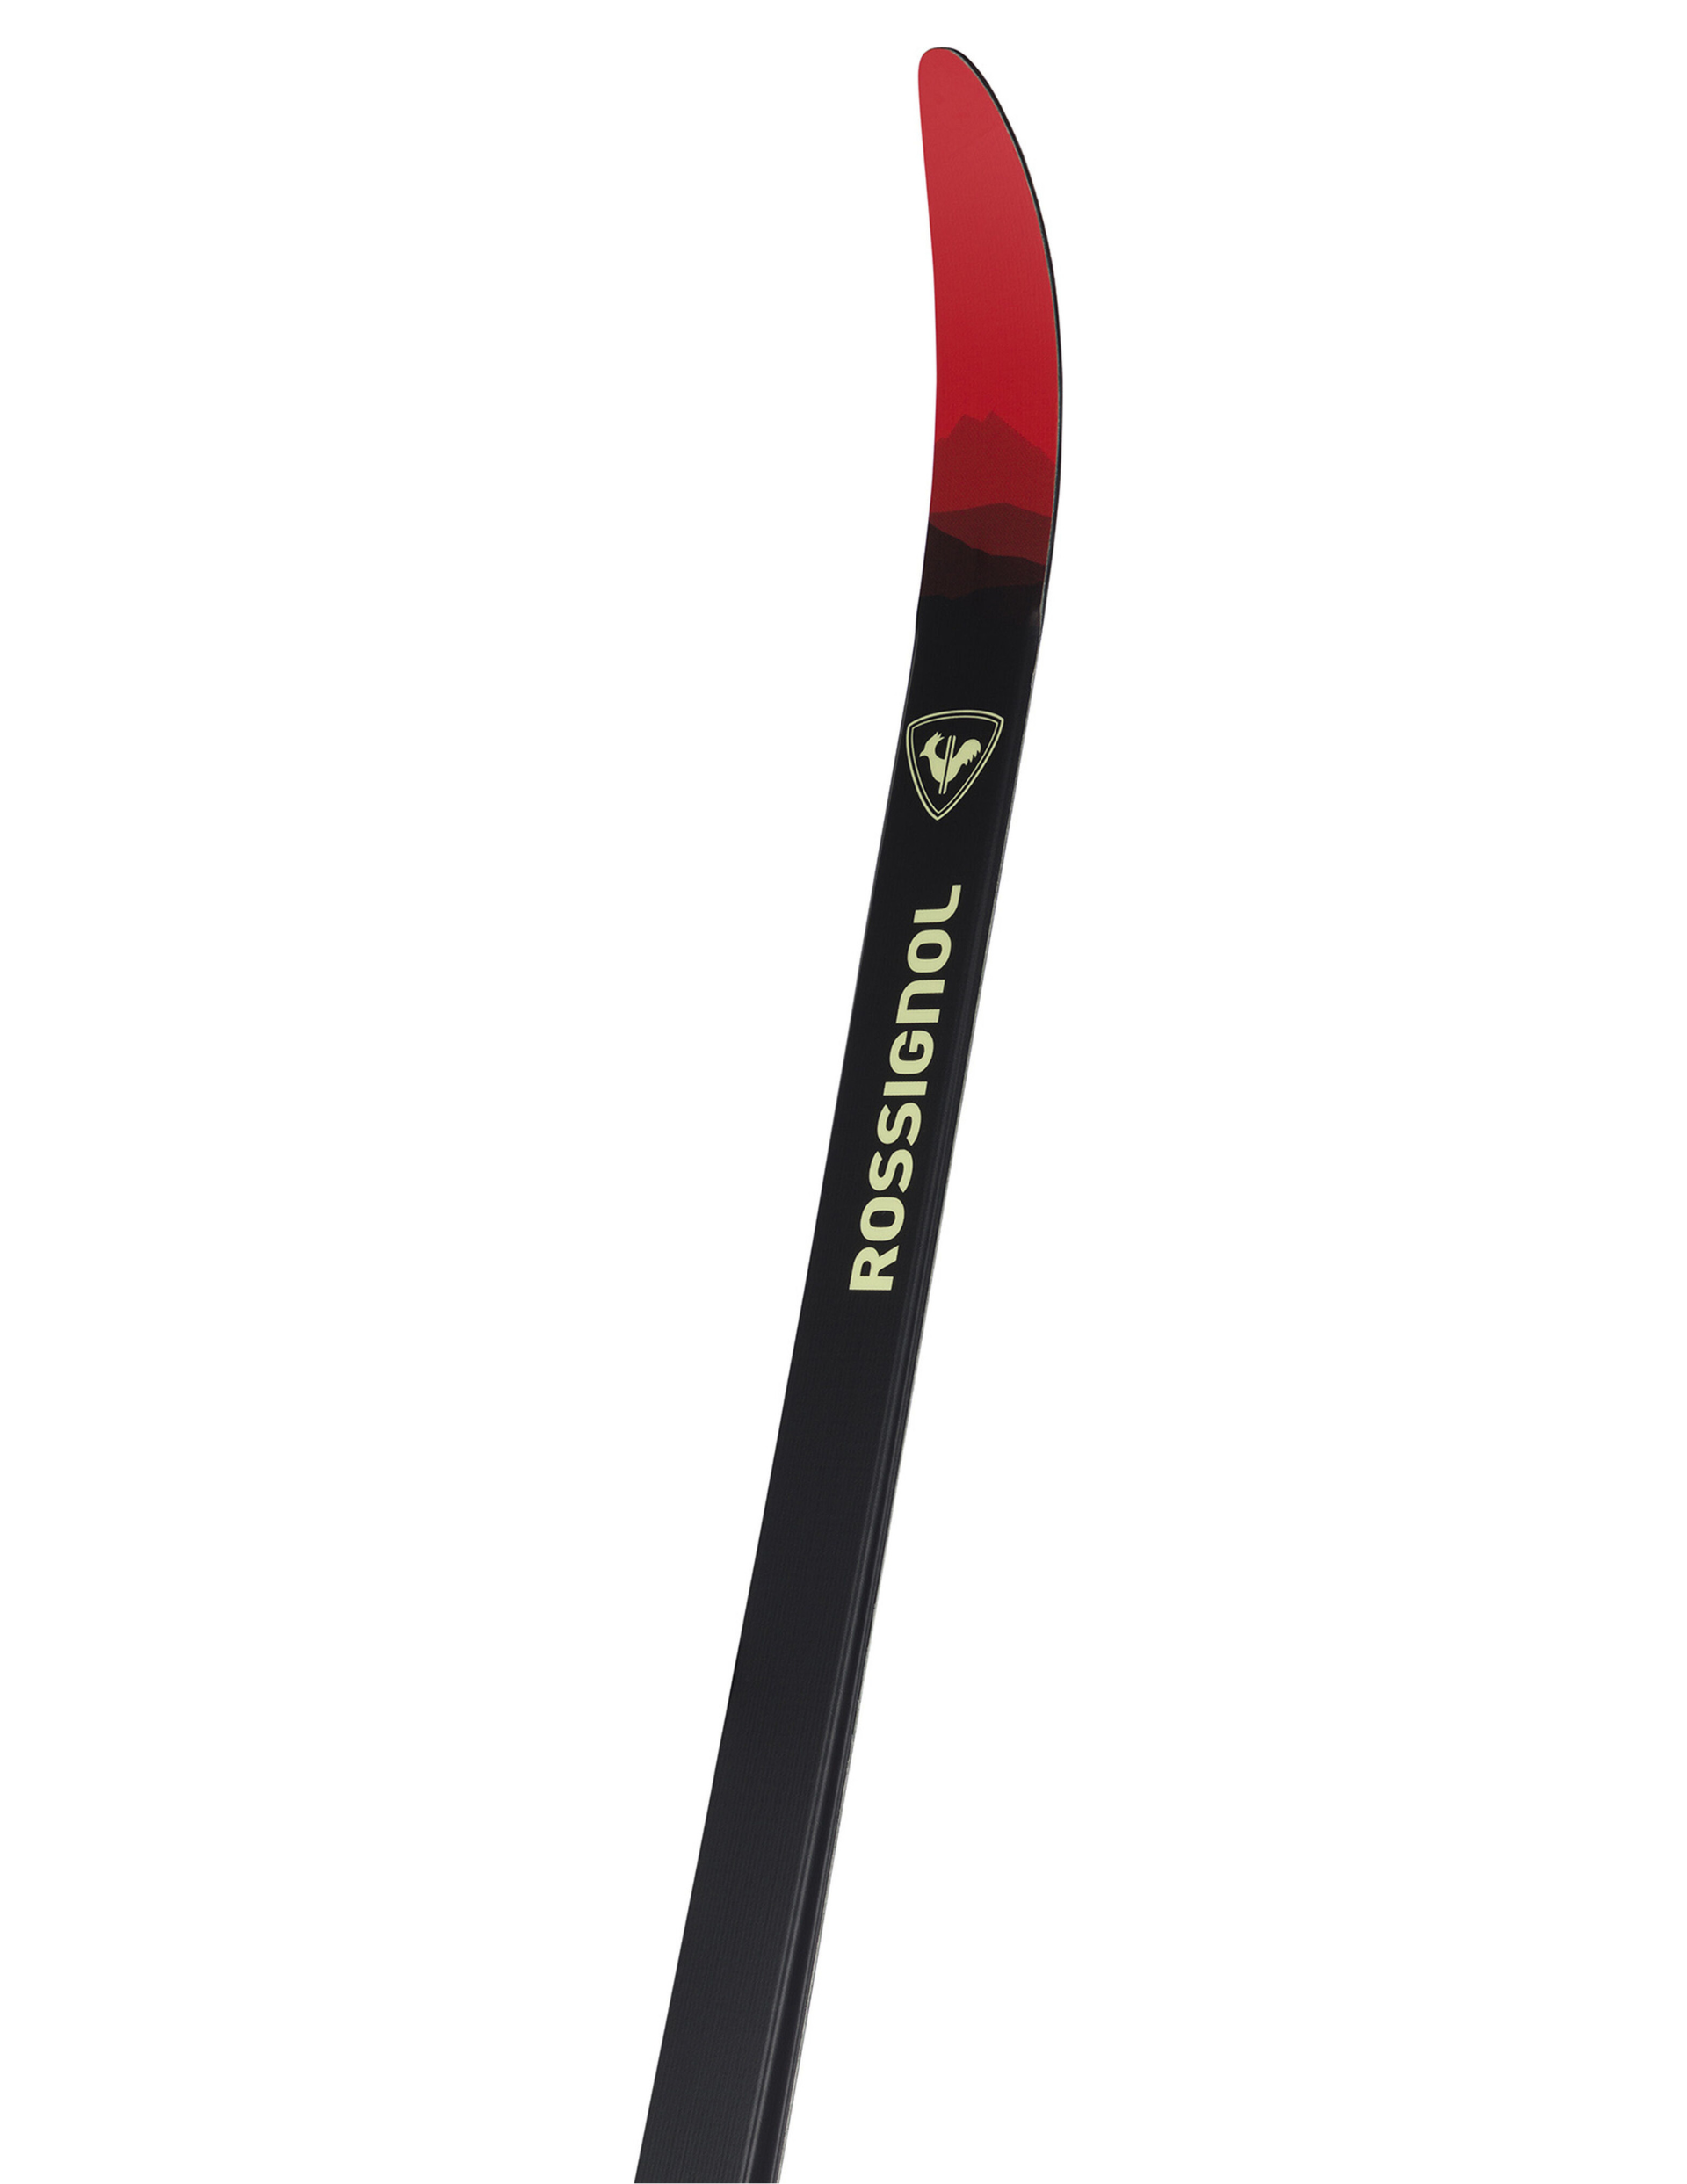 Skis de Fond Touring Rossignol X-Tour Venture Waxless + Fixations Tour Step-In